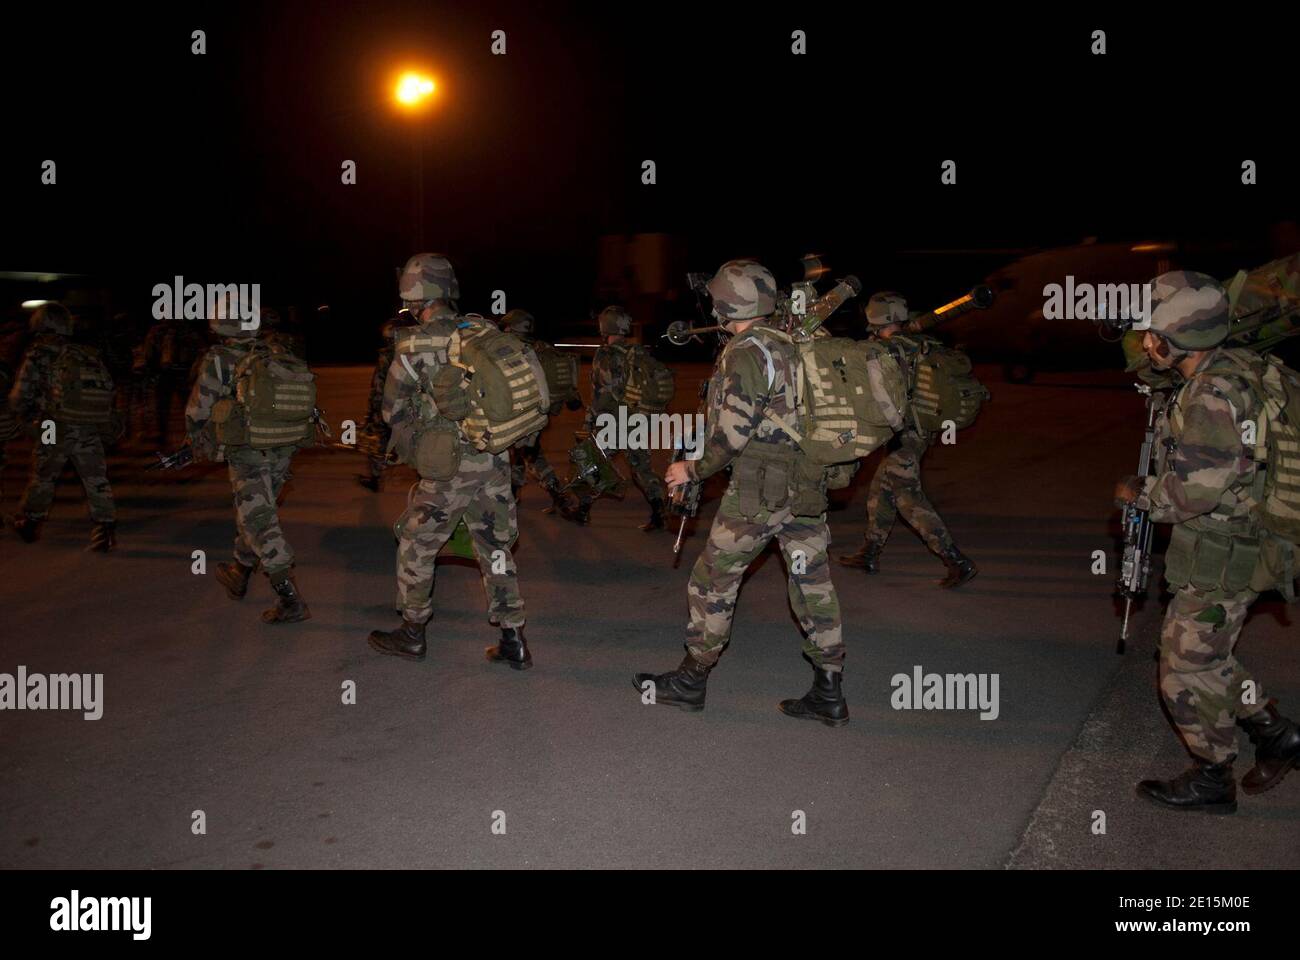 French troops took control of Abidjan airport, Ivory Coast during the night enter on April 2 and 3, 2011. France has also boosted its UN Licorne (Unicorn) mission in the cocoa-rich nation by 300 to around 1,400 troops, where part of their mission is to protect foreigners from attacks and looting amid rising insecurity. Photo by SCH Blanchet/ECPAD/ABACAPRESS.COM Stock Photo